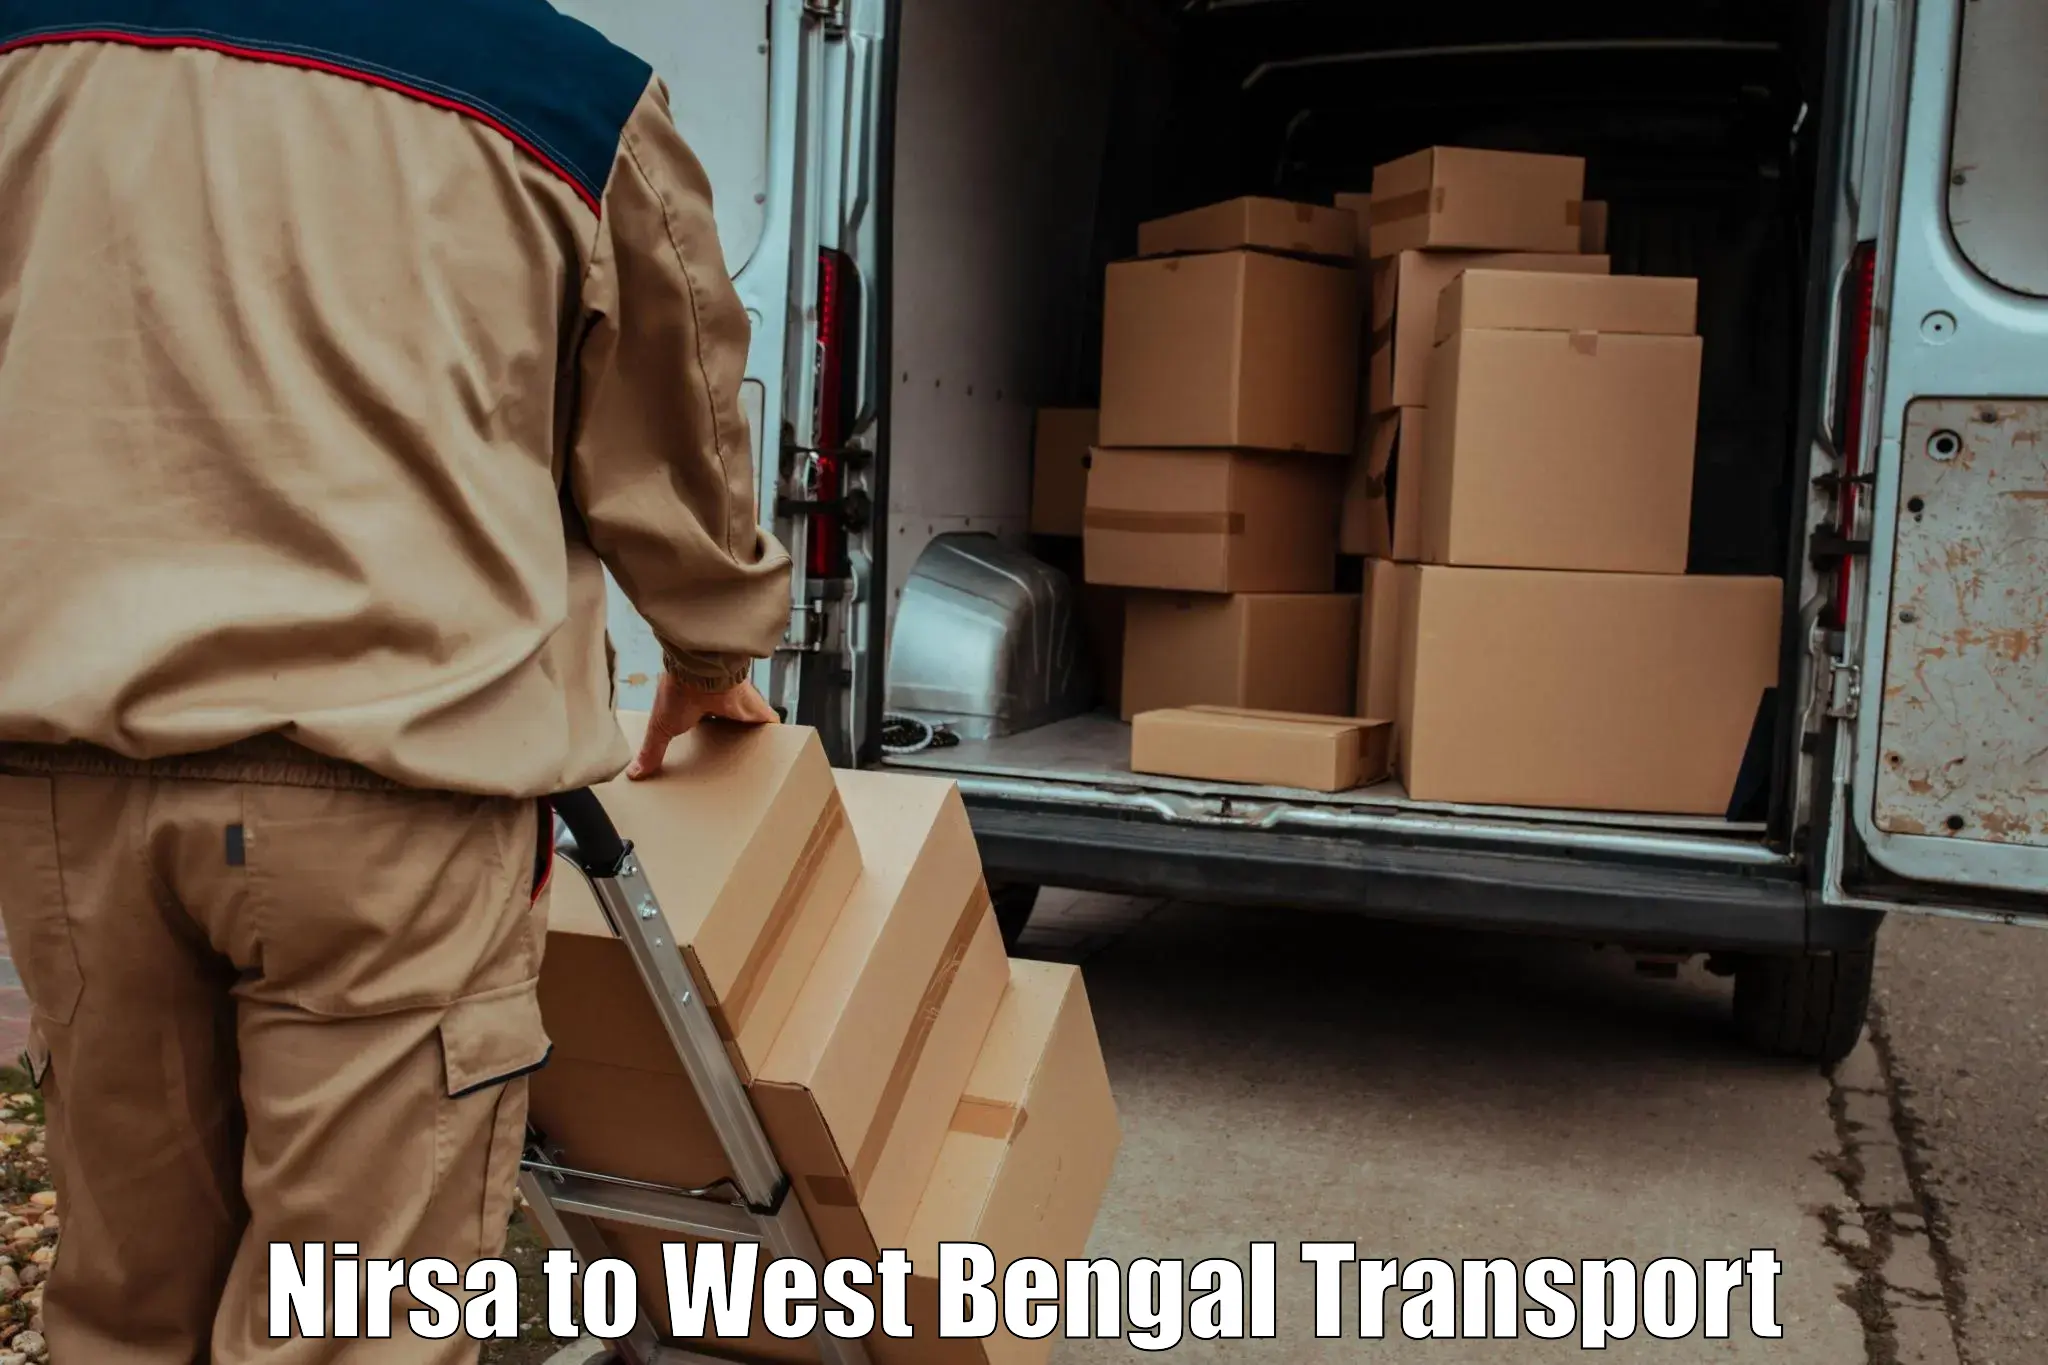 Nearby transport service Nirsa to West Bengal